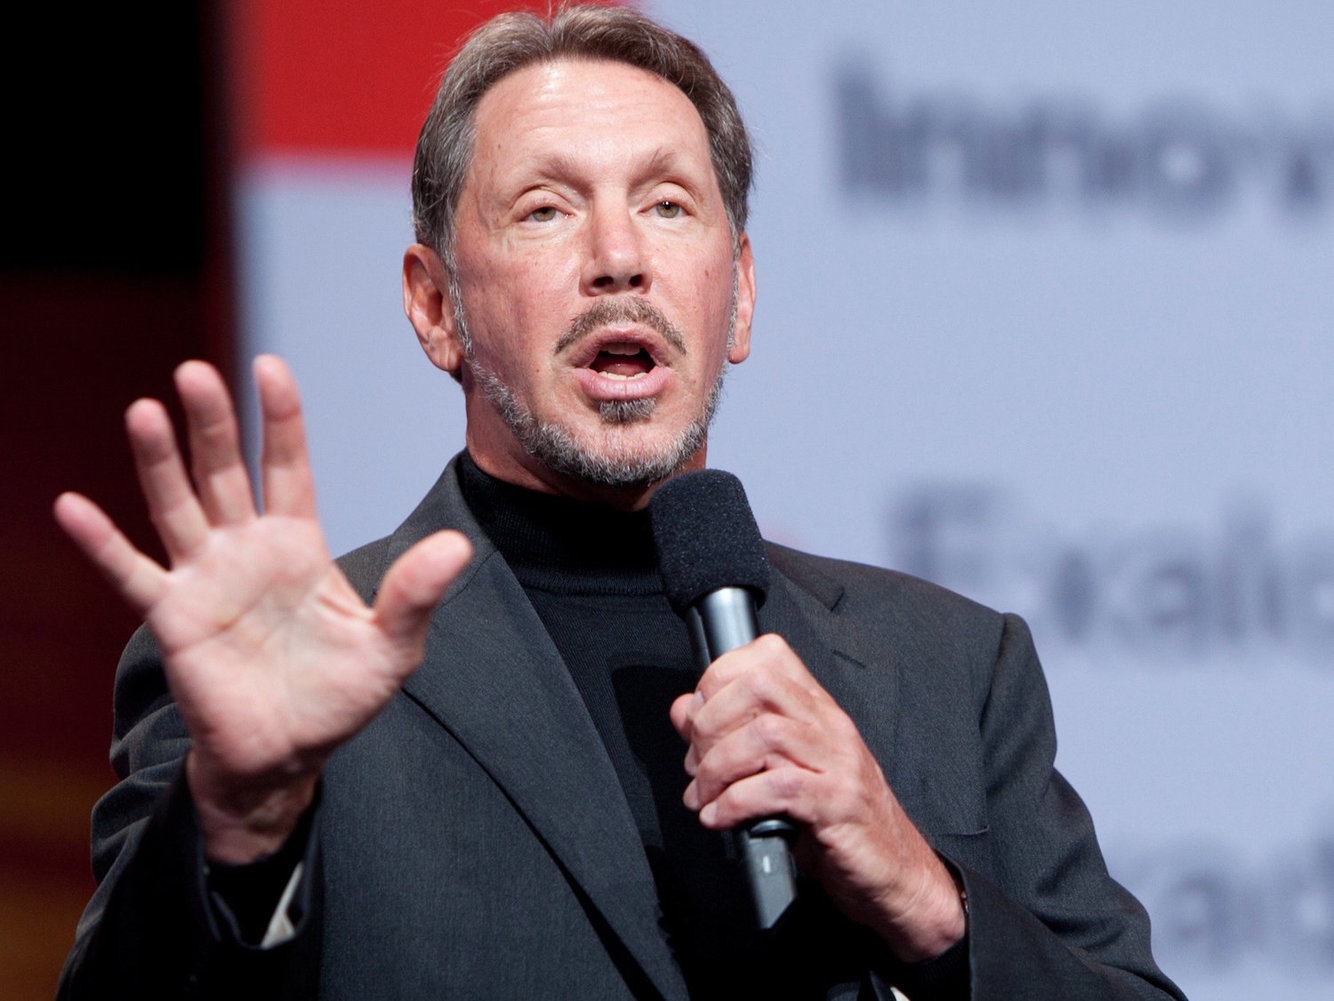 Larry Ellison has a casino once owned by Frank Sinatra.